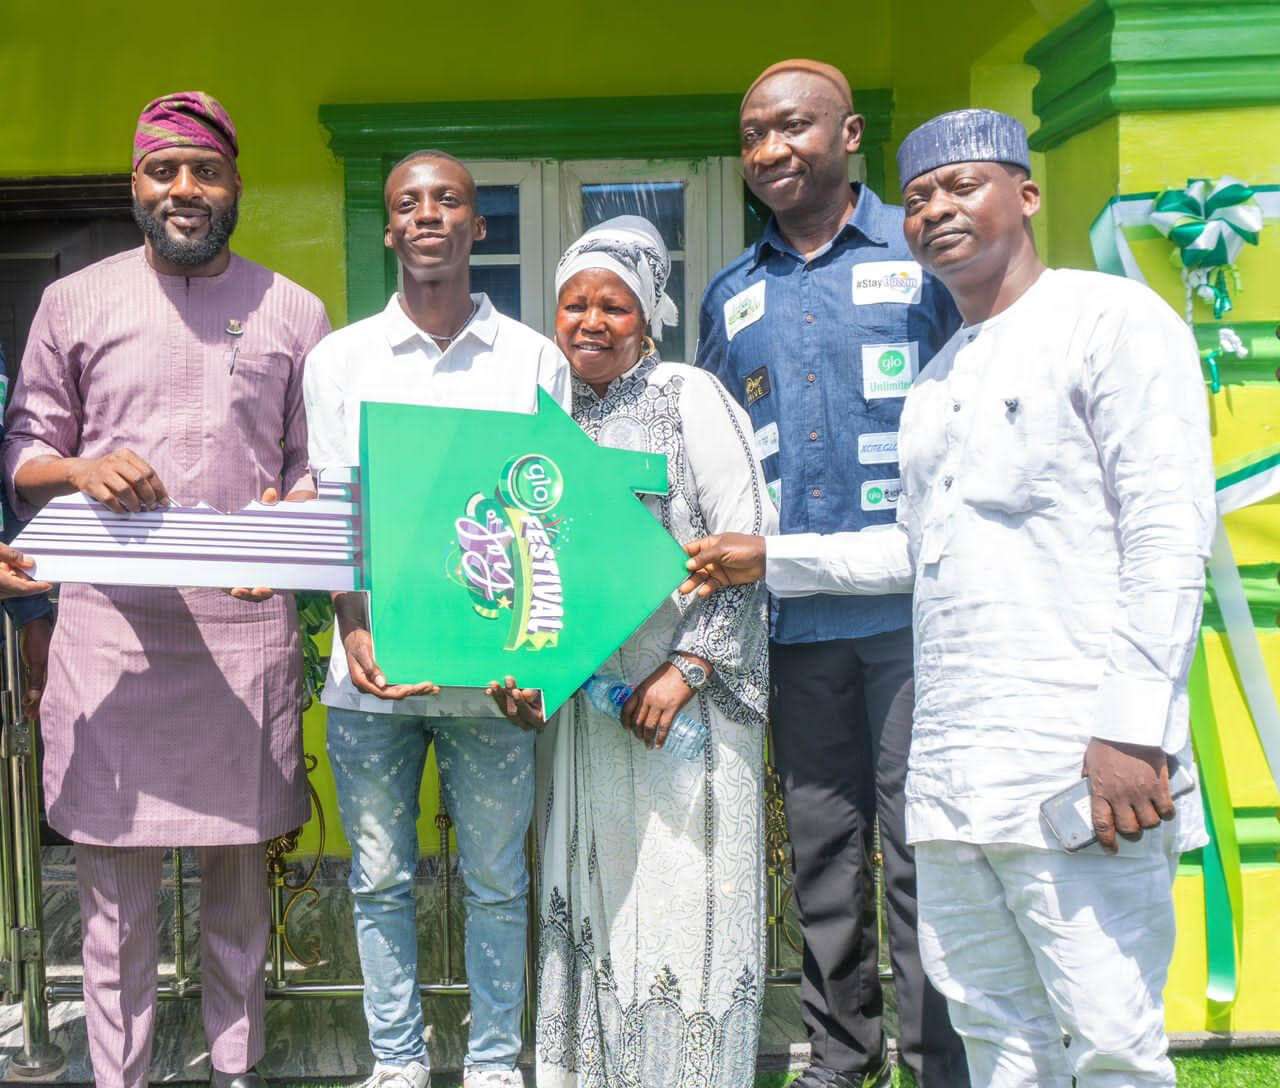 19 year old undergraduate wins first House in Glo Festival of Joy Promo